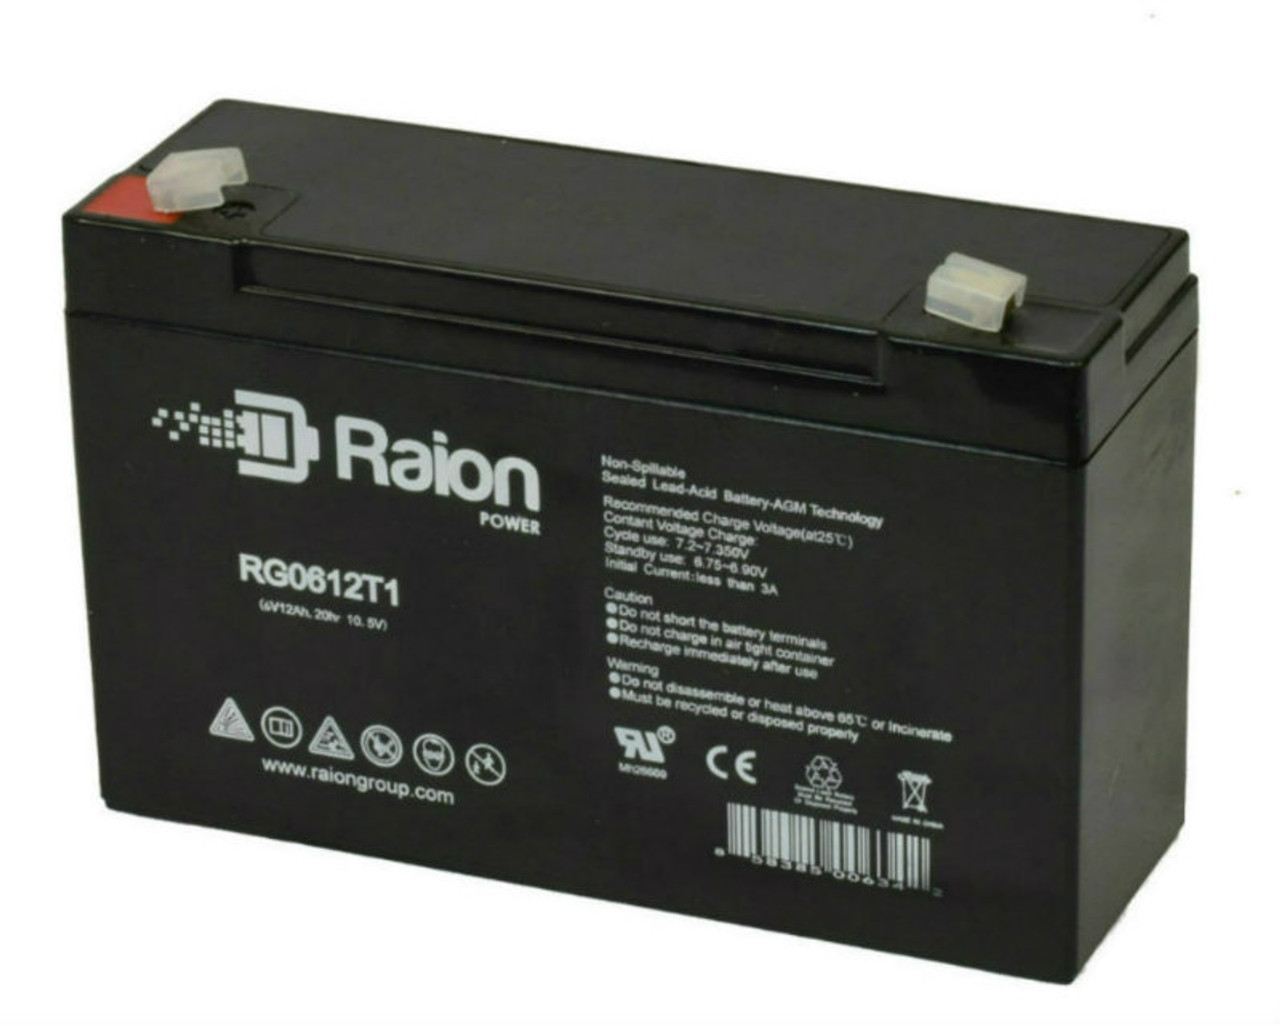 Raion Power RG06120T1 6V 12Ah Replacement UPS Battery Cartridge for Tripp Lite OmniPro 850VA OMNIPRO850